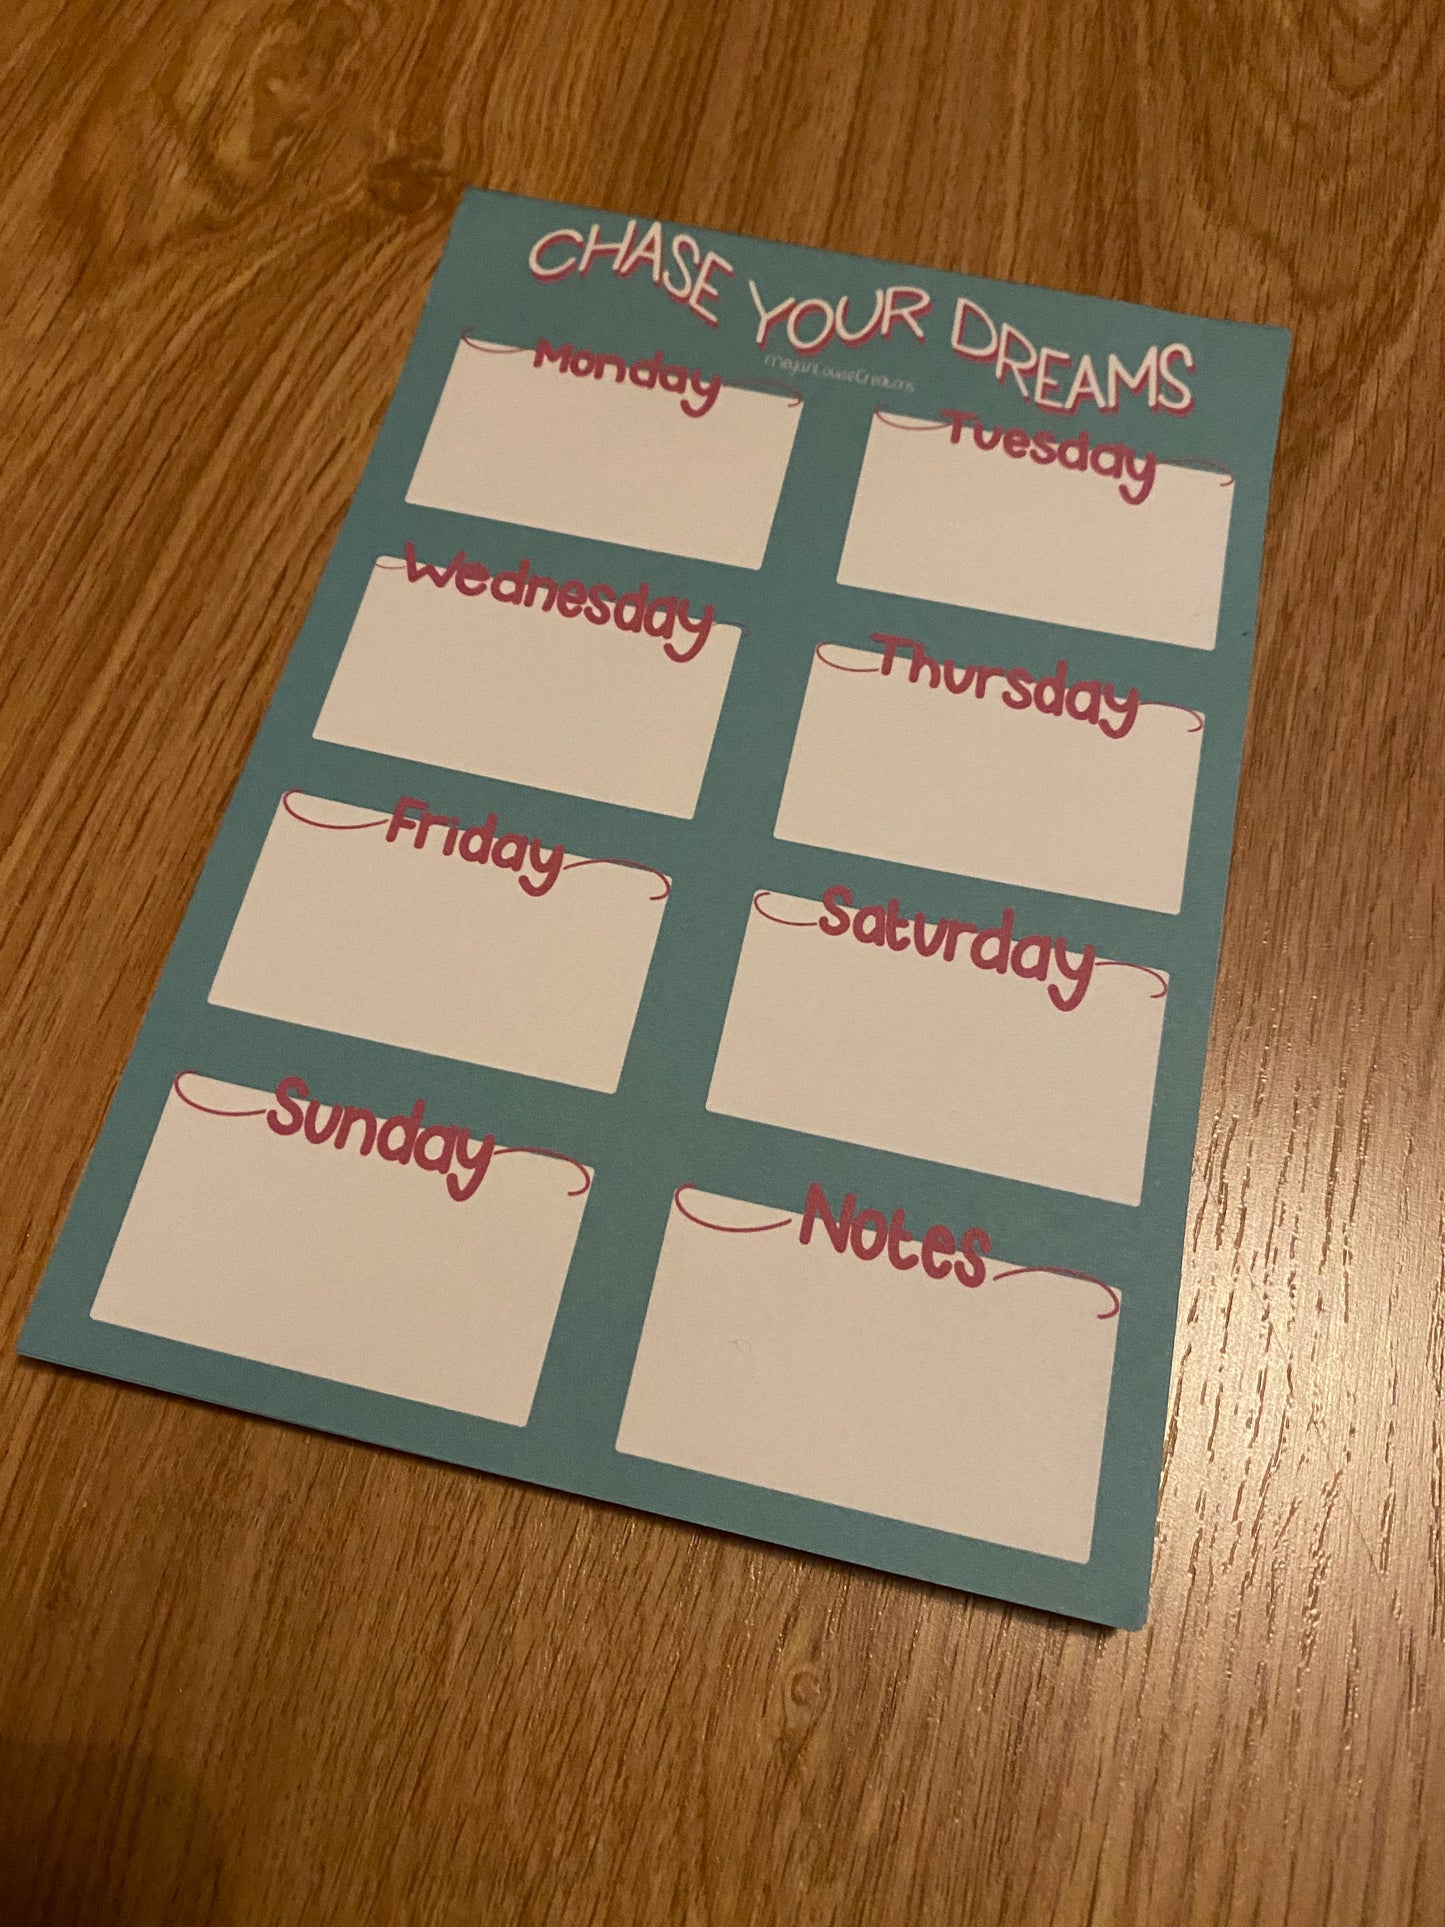 Chase your dreams weekly planner